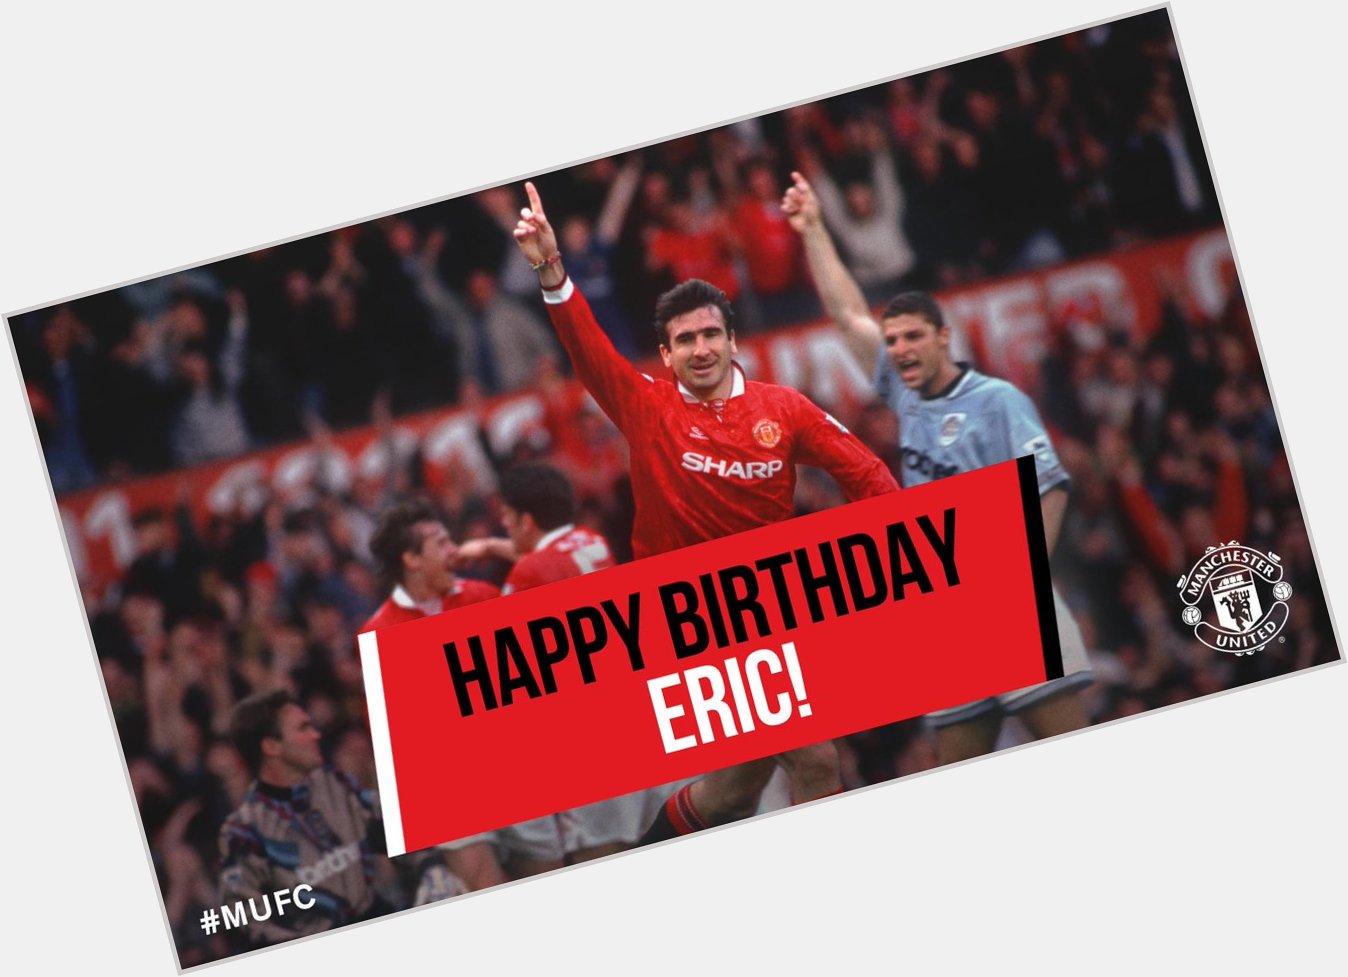 Happy birthday to legend Eric Cantona! We hope you have a fantastic day! 